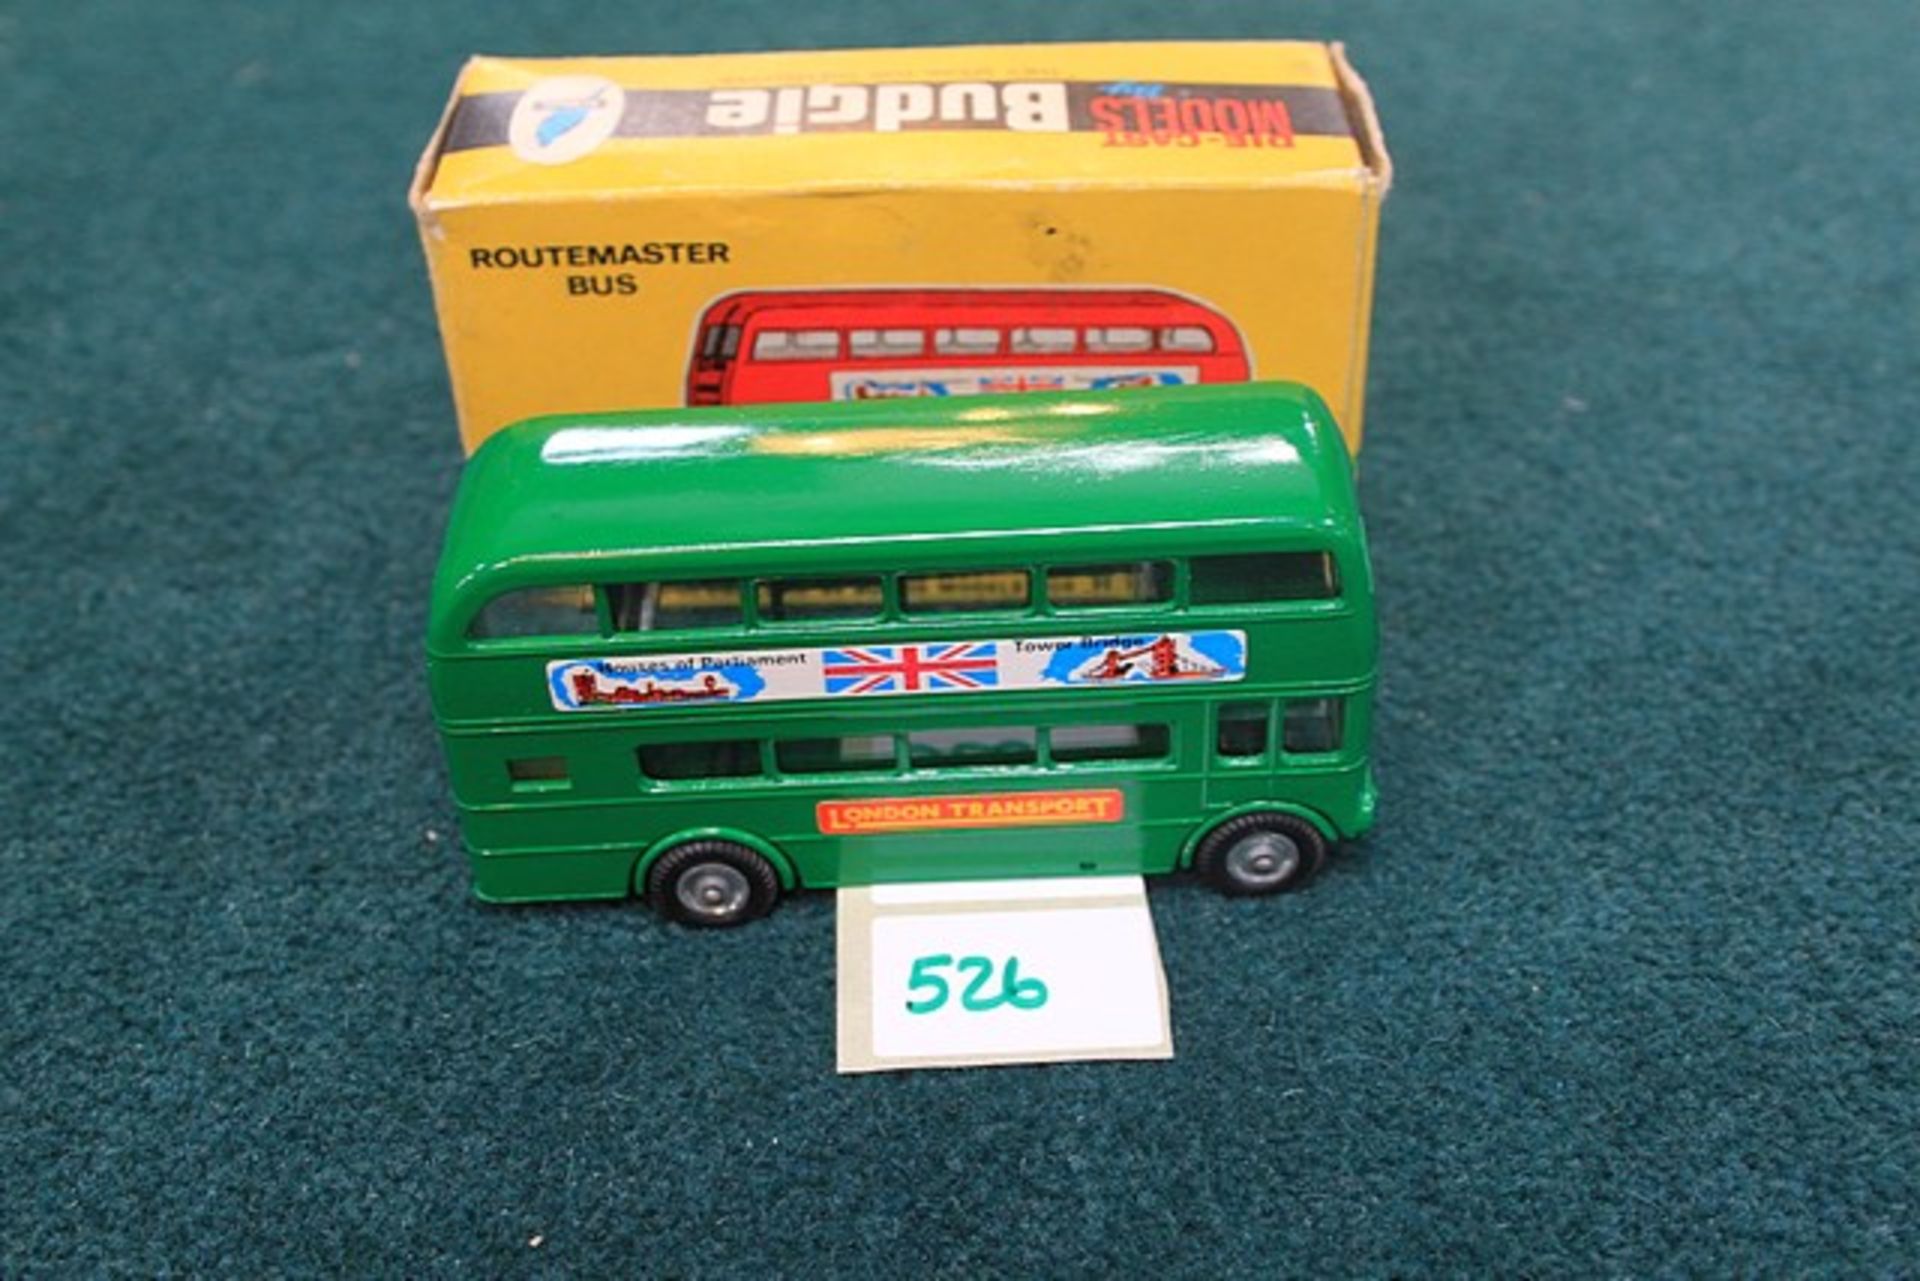 Budgie Diecast # 236 Route Master Bus Complete With Box - Image 2 of 2